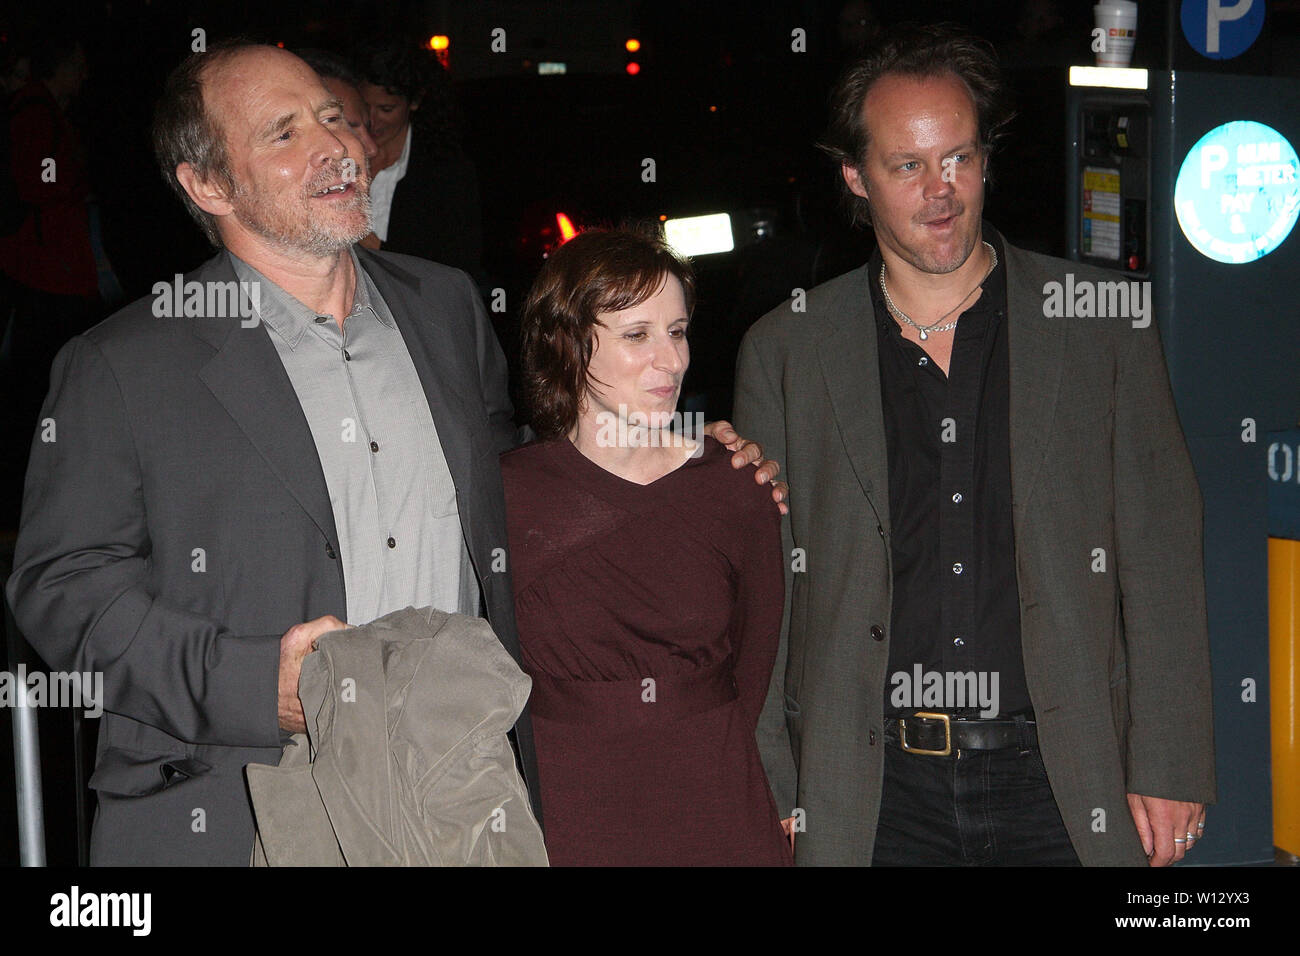 New York, USA. 27 September, 2008. Will Patton, Kelly Reichardt, Larry Fessenden at the New York Film Festival premiere of WENDY & LUCY at The Ziegfeld Theater. Credit: Steve Mack/Alamy Stock Photo